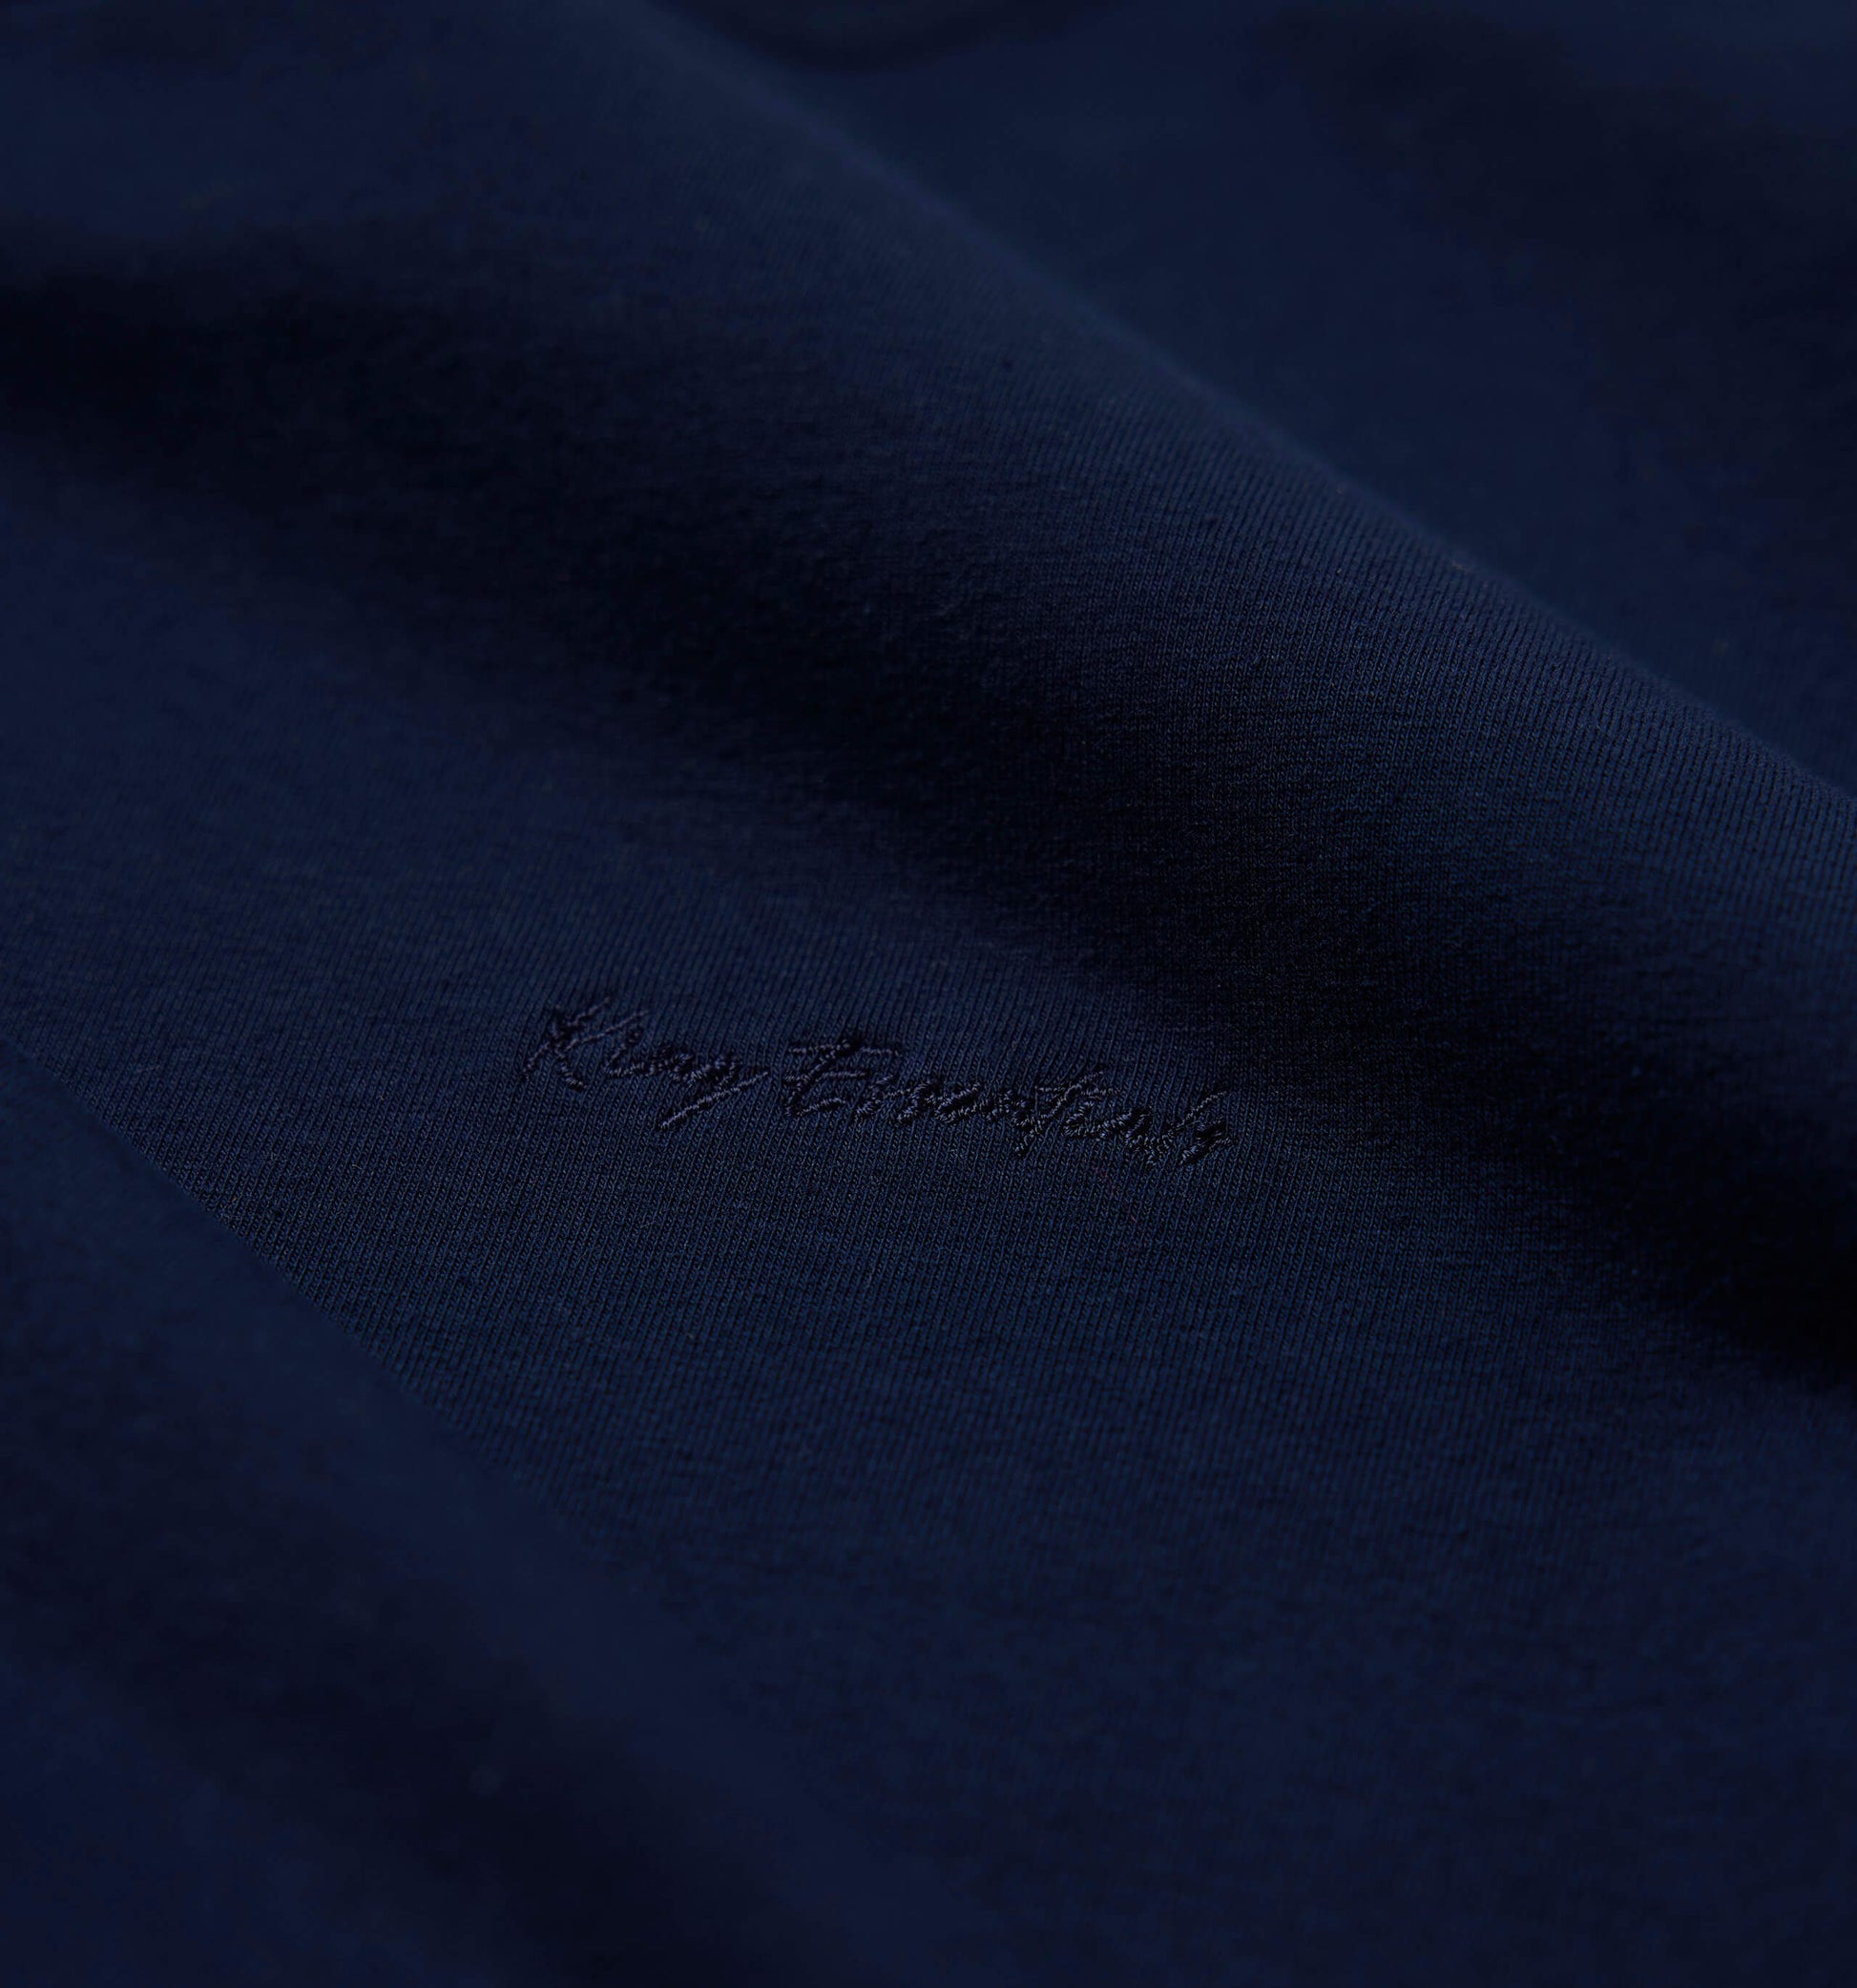 The Shawn - Logo Crewneck T-shirt In Navy From King Essentials